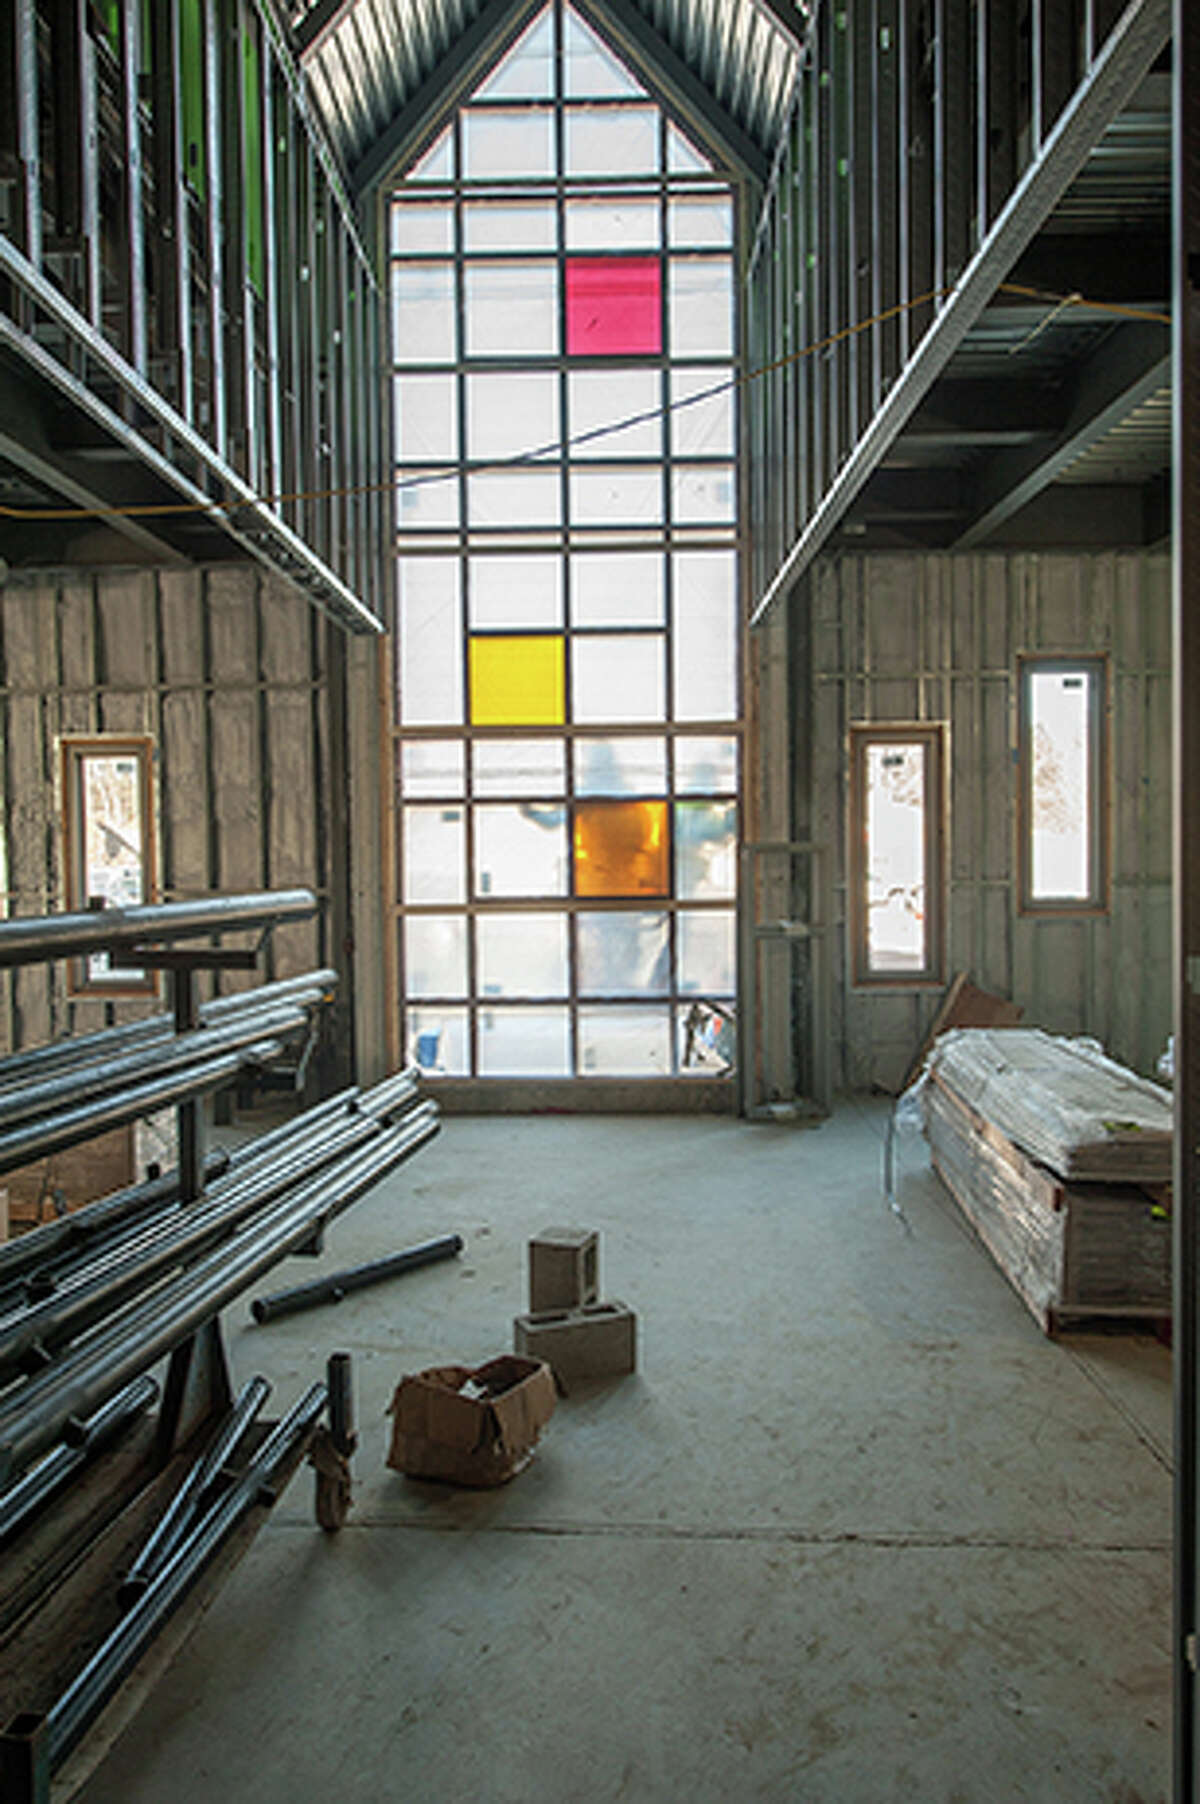 A window in the library of the new Sandy Hook Elementary School underconstruction. Please Credit ROBERT UMENHOFER